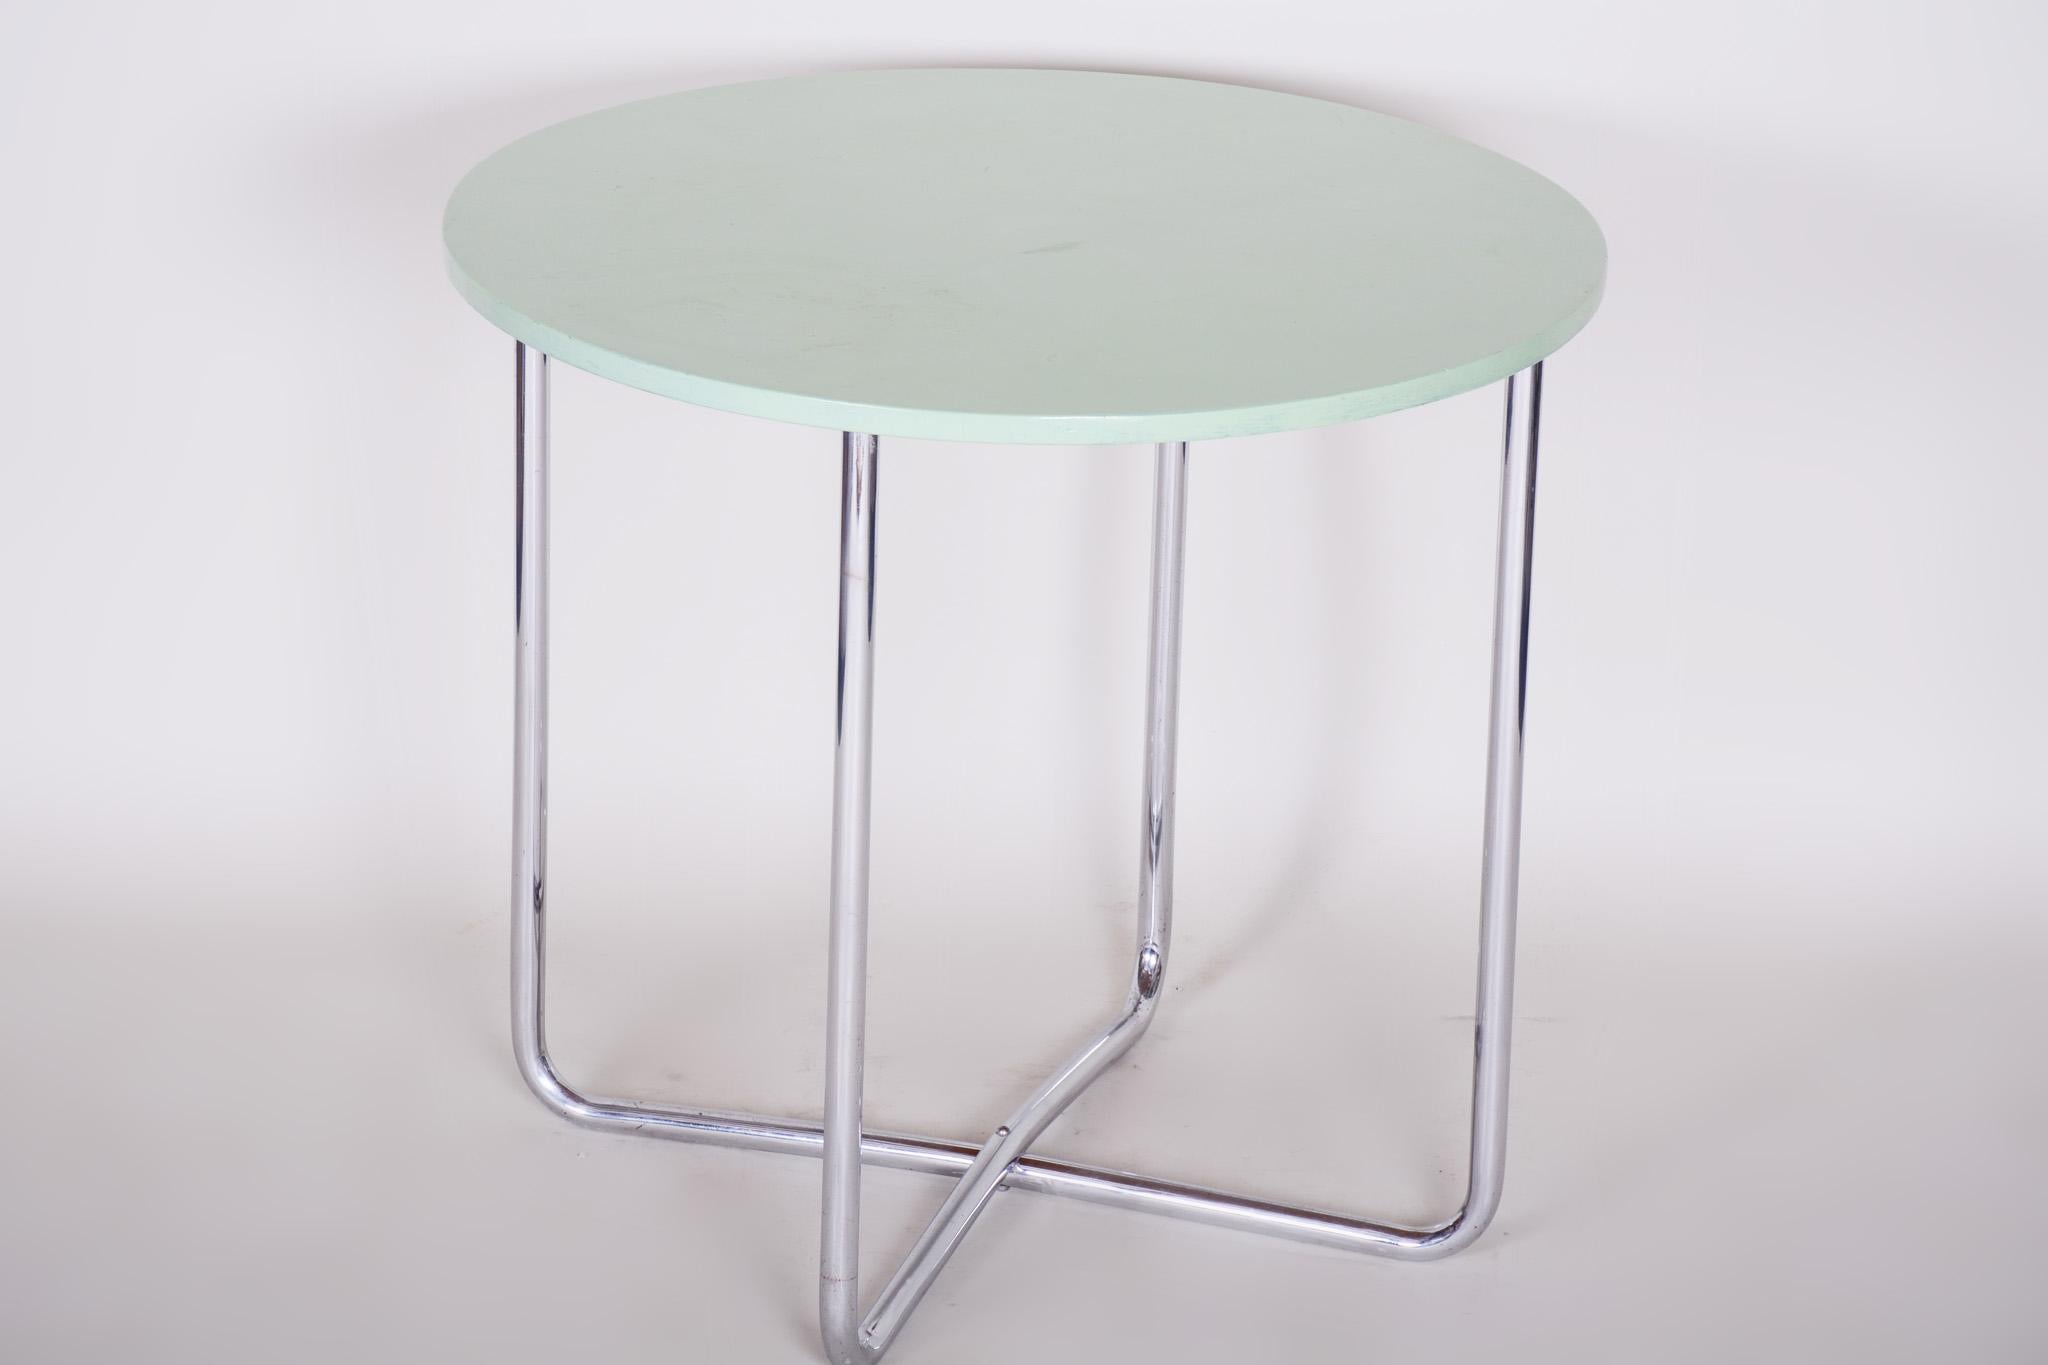 Chrome Czech Bauhaus Green Rounded Table, 1930s, Original Very Well Condition In Good Condition For Sale In Horomerice, CZ